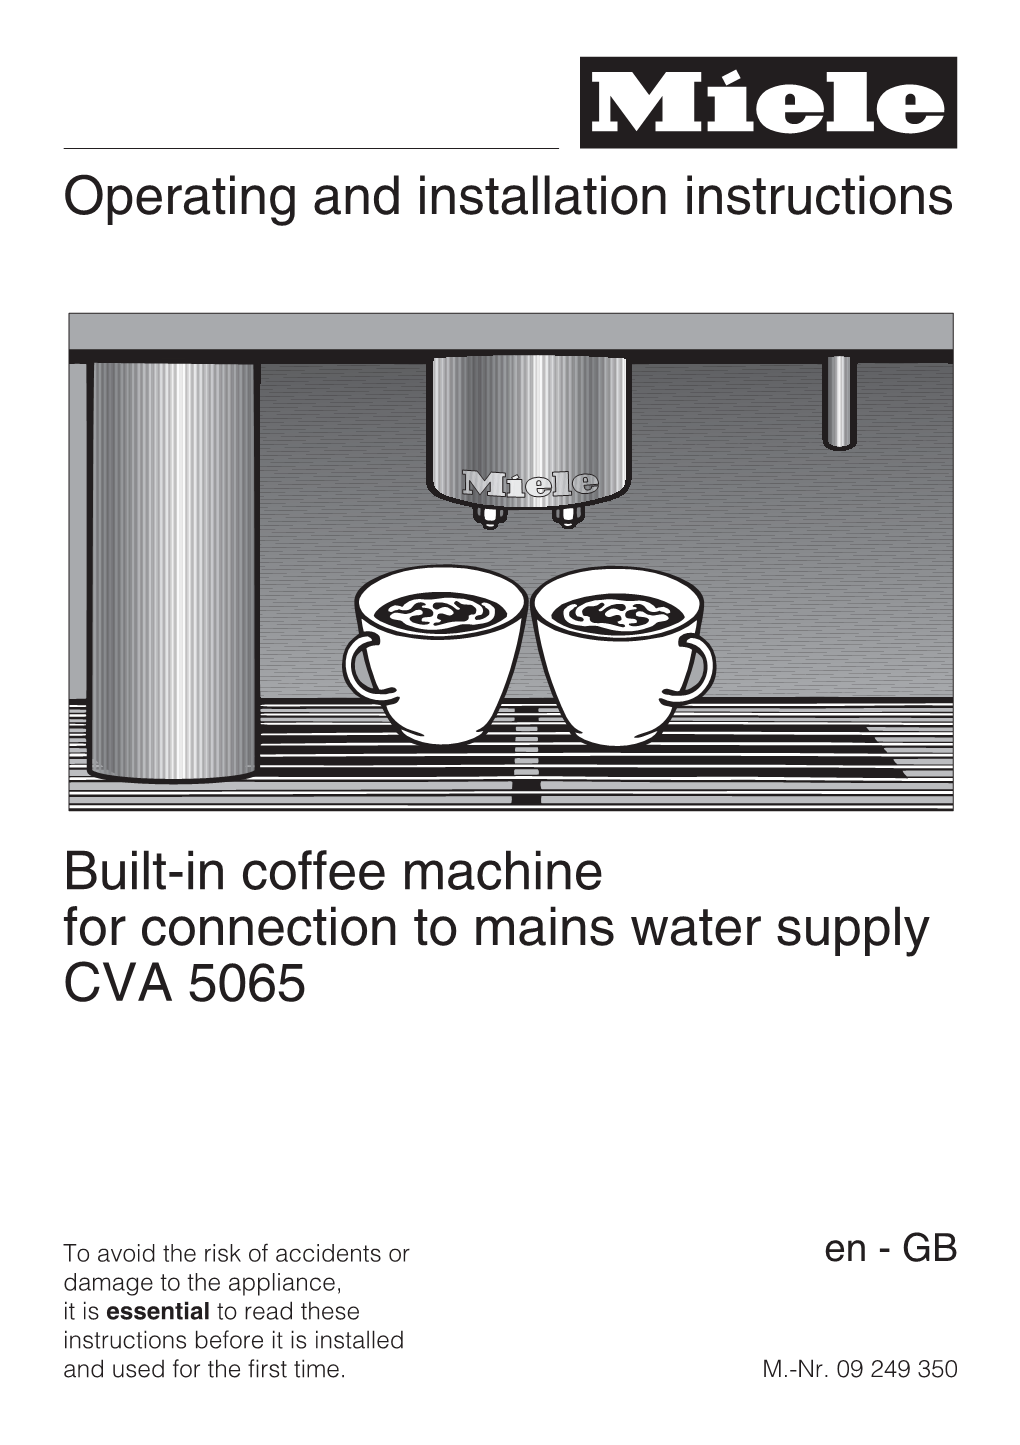 Operating and Installation Instructions Built-In Coffee Machine for Connection to Mains Water Supply CVA 5065